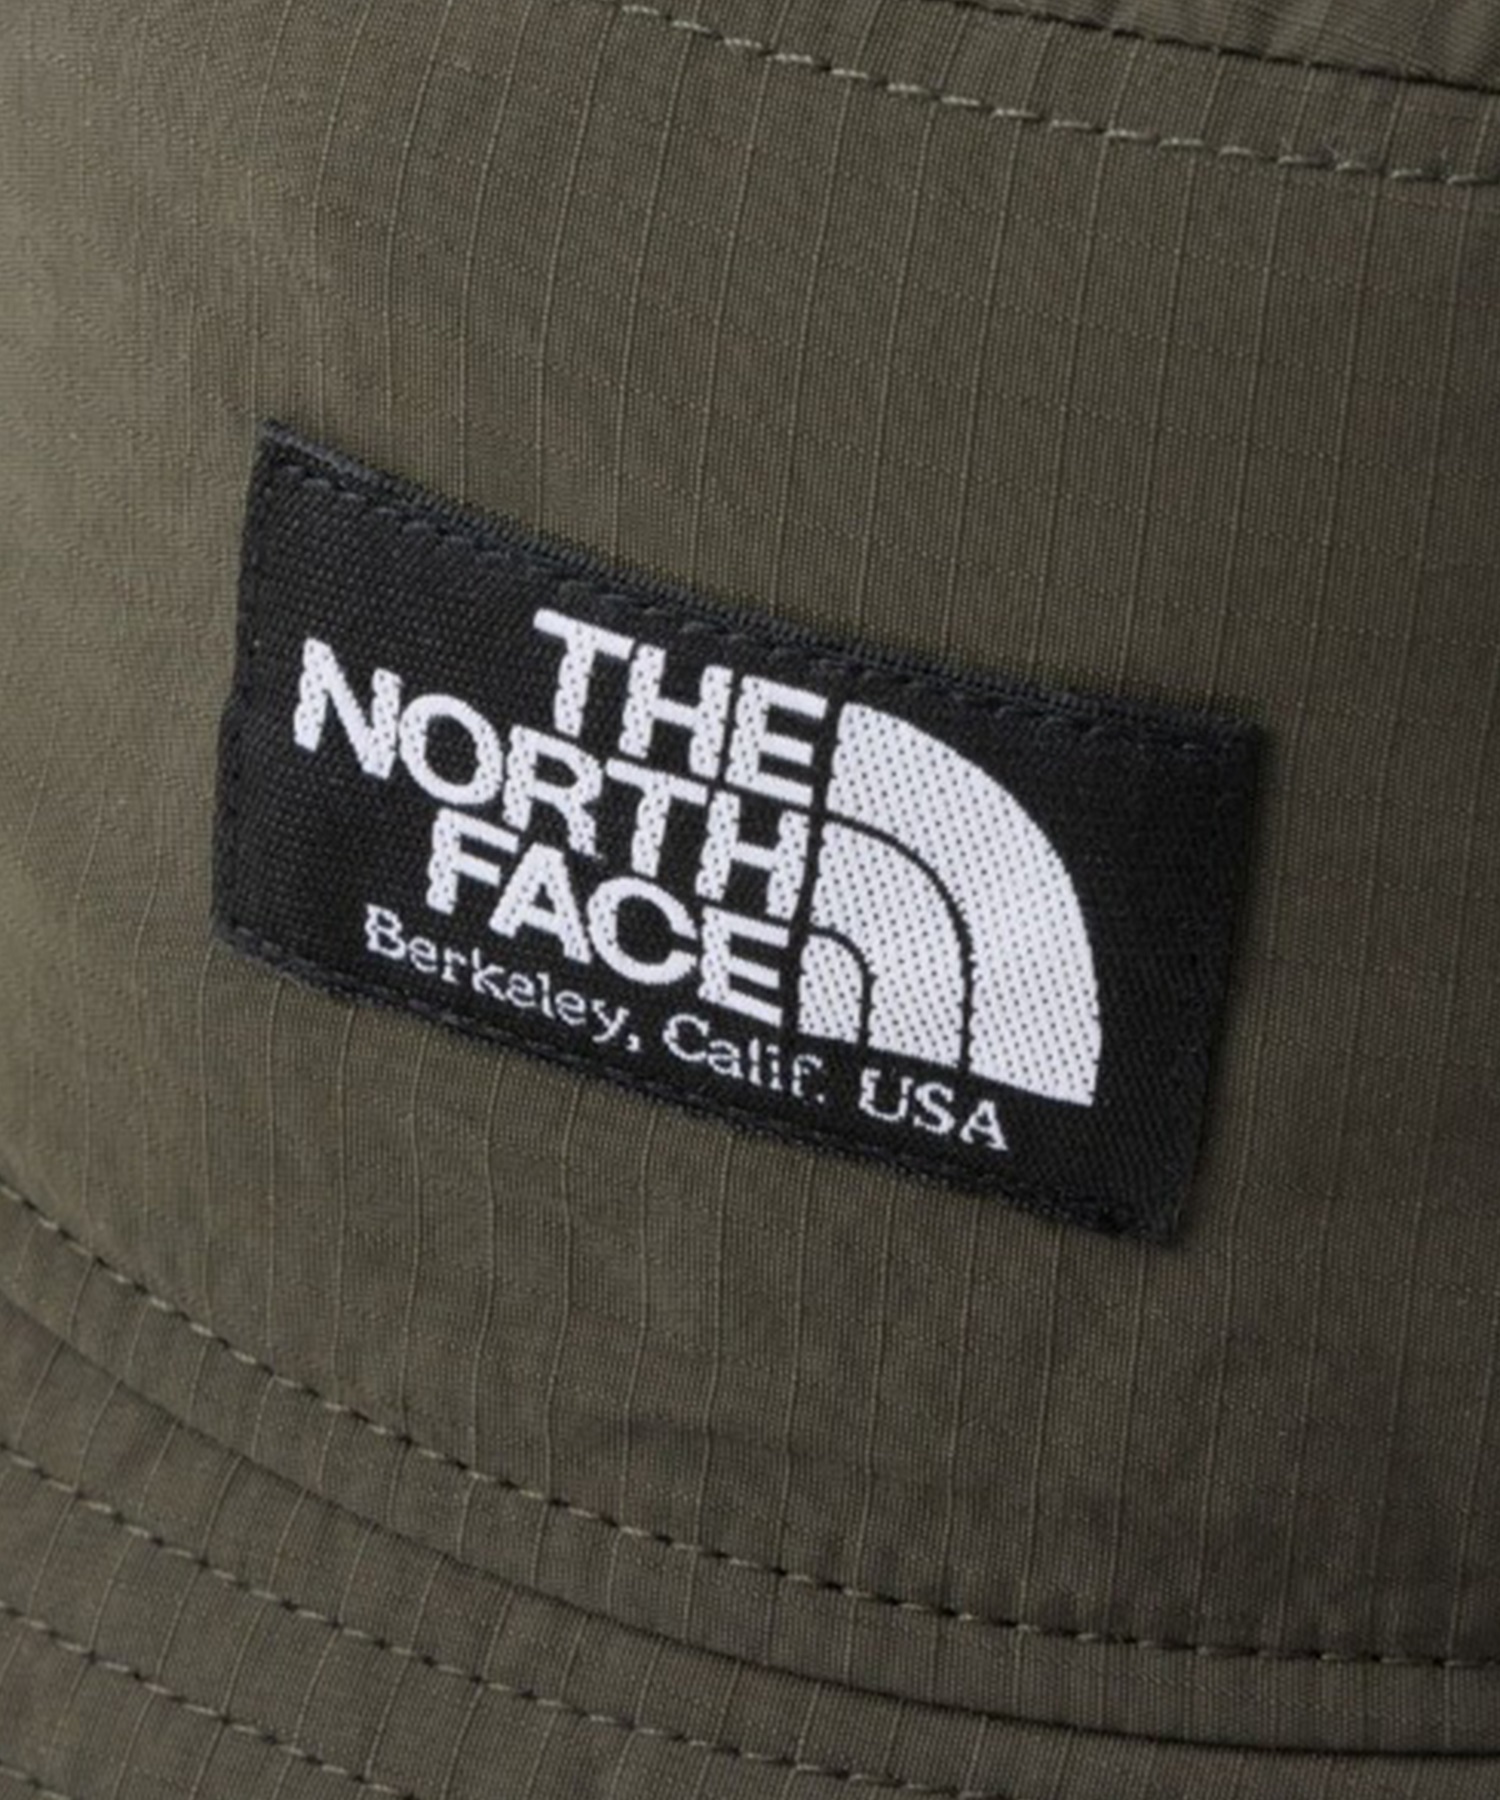 THE NORTH FACE ザ・ノース・フェイス CAMP SIDE HAT NN02345 ハット フェス(NK-M)